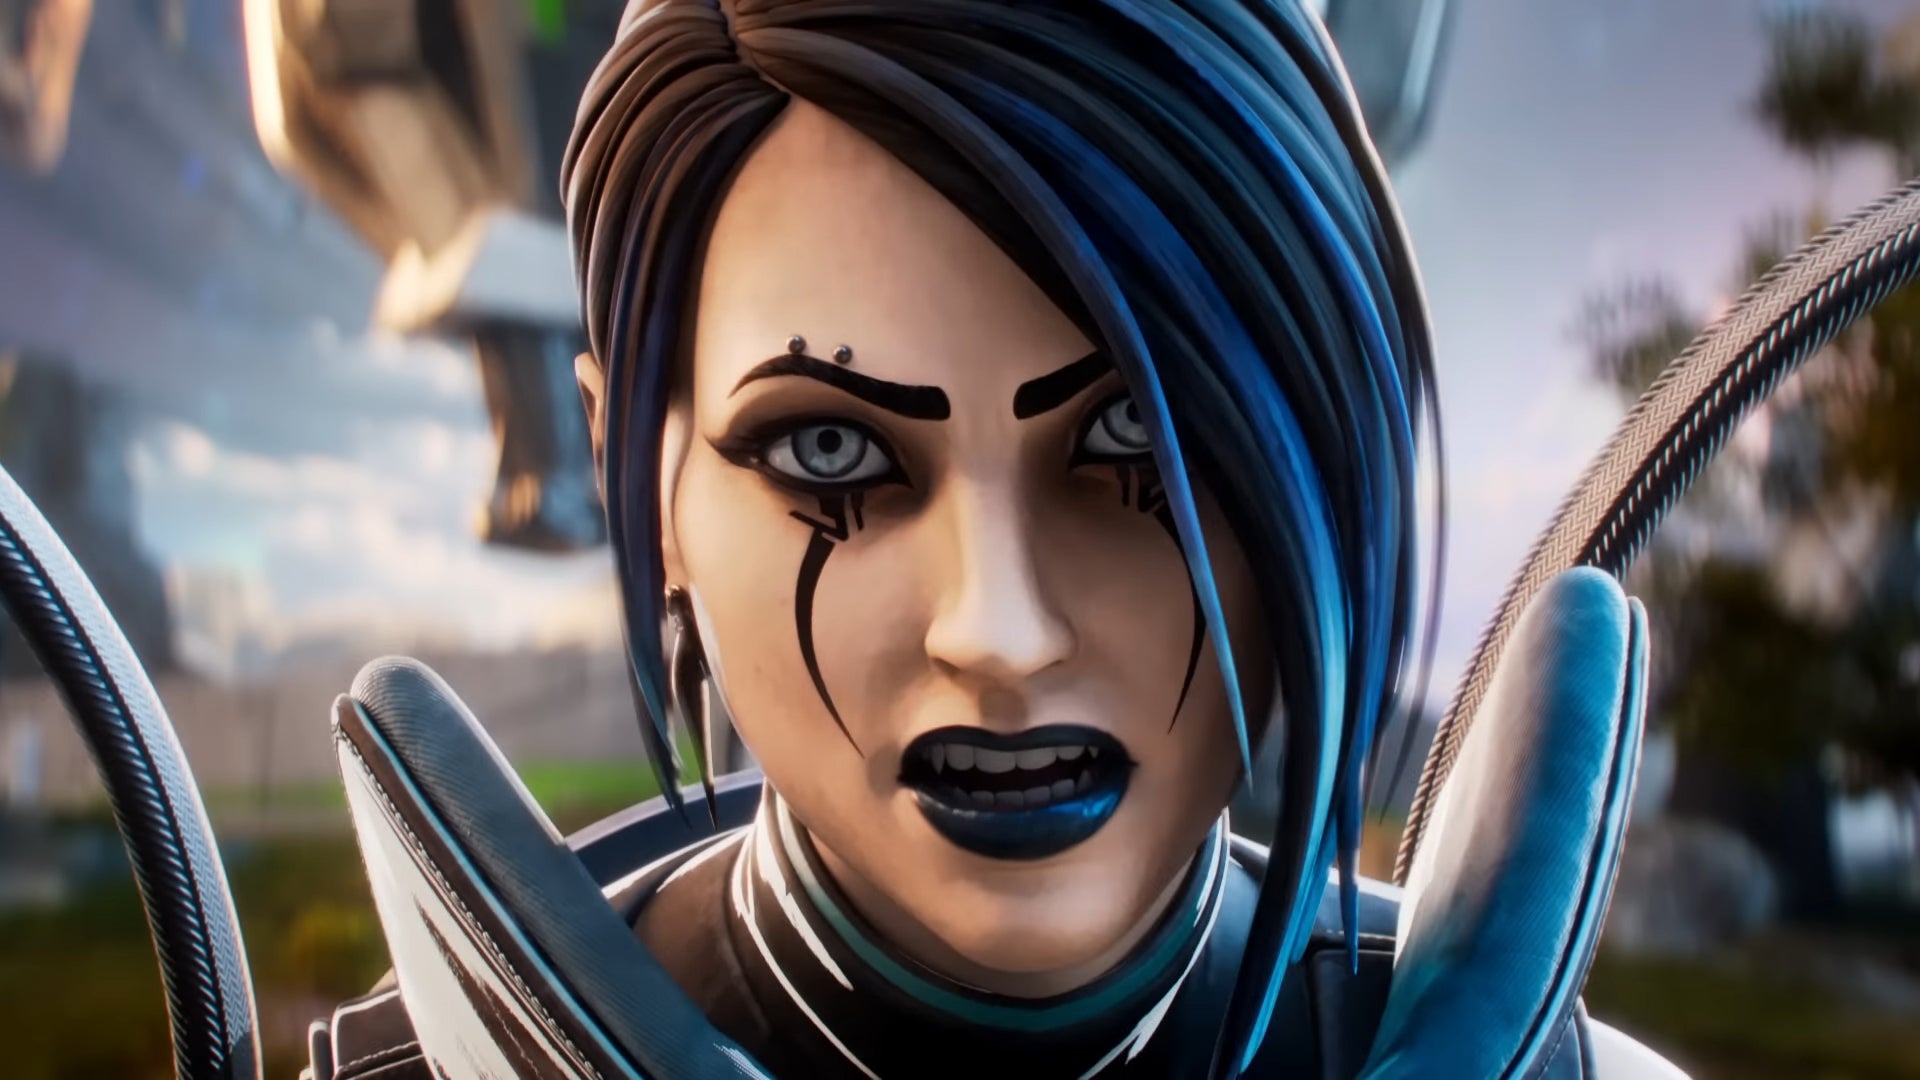 A close up of the face of Catalyst, an Apex Legends character, from the Season 15 launch trailer.